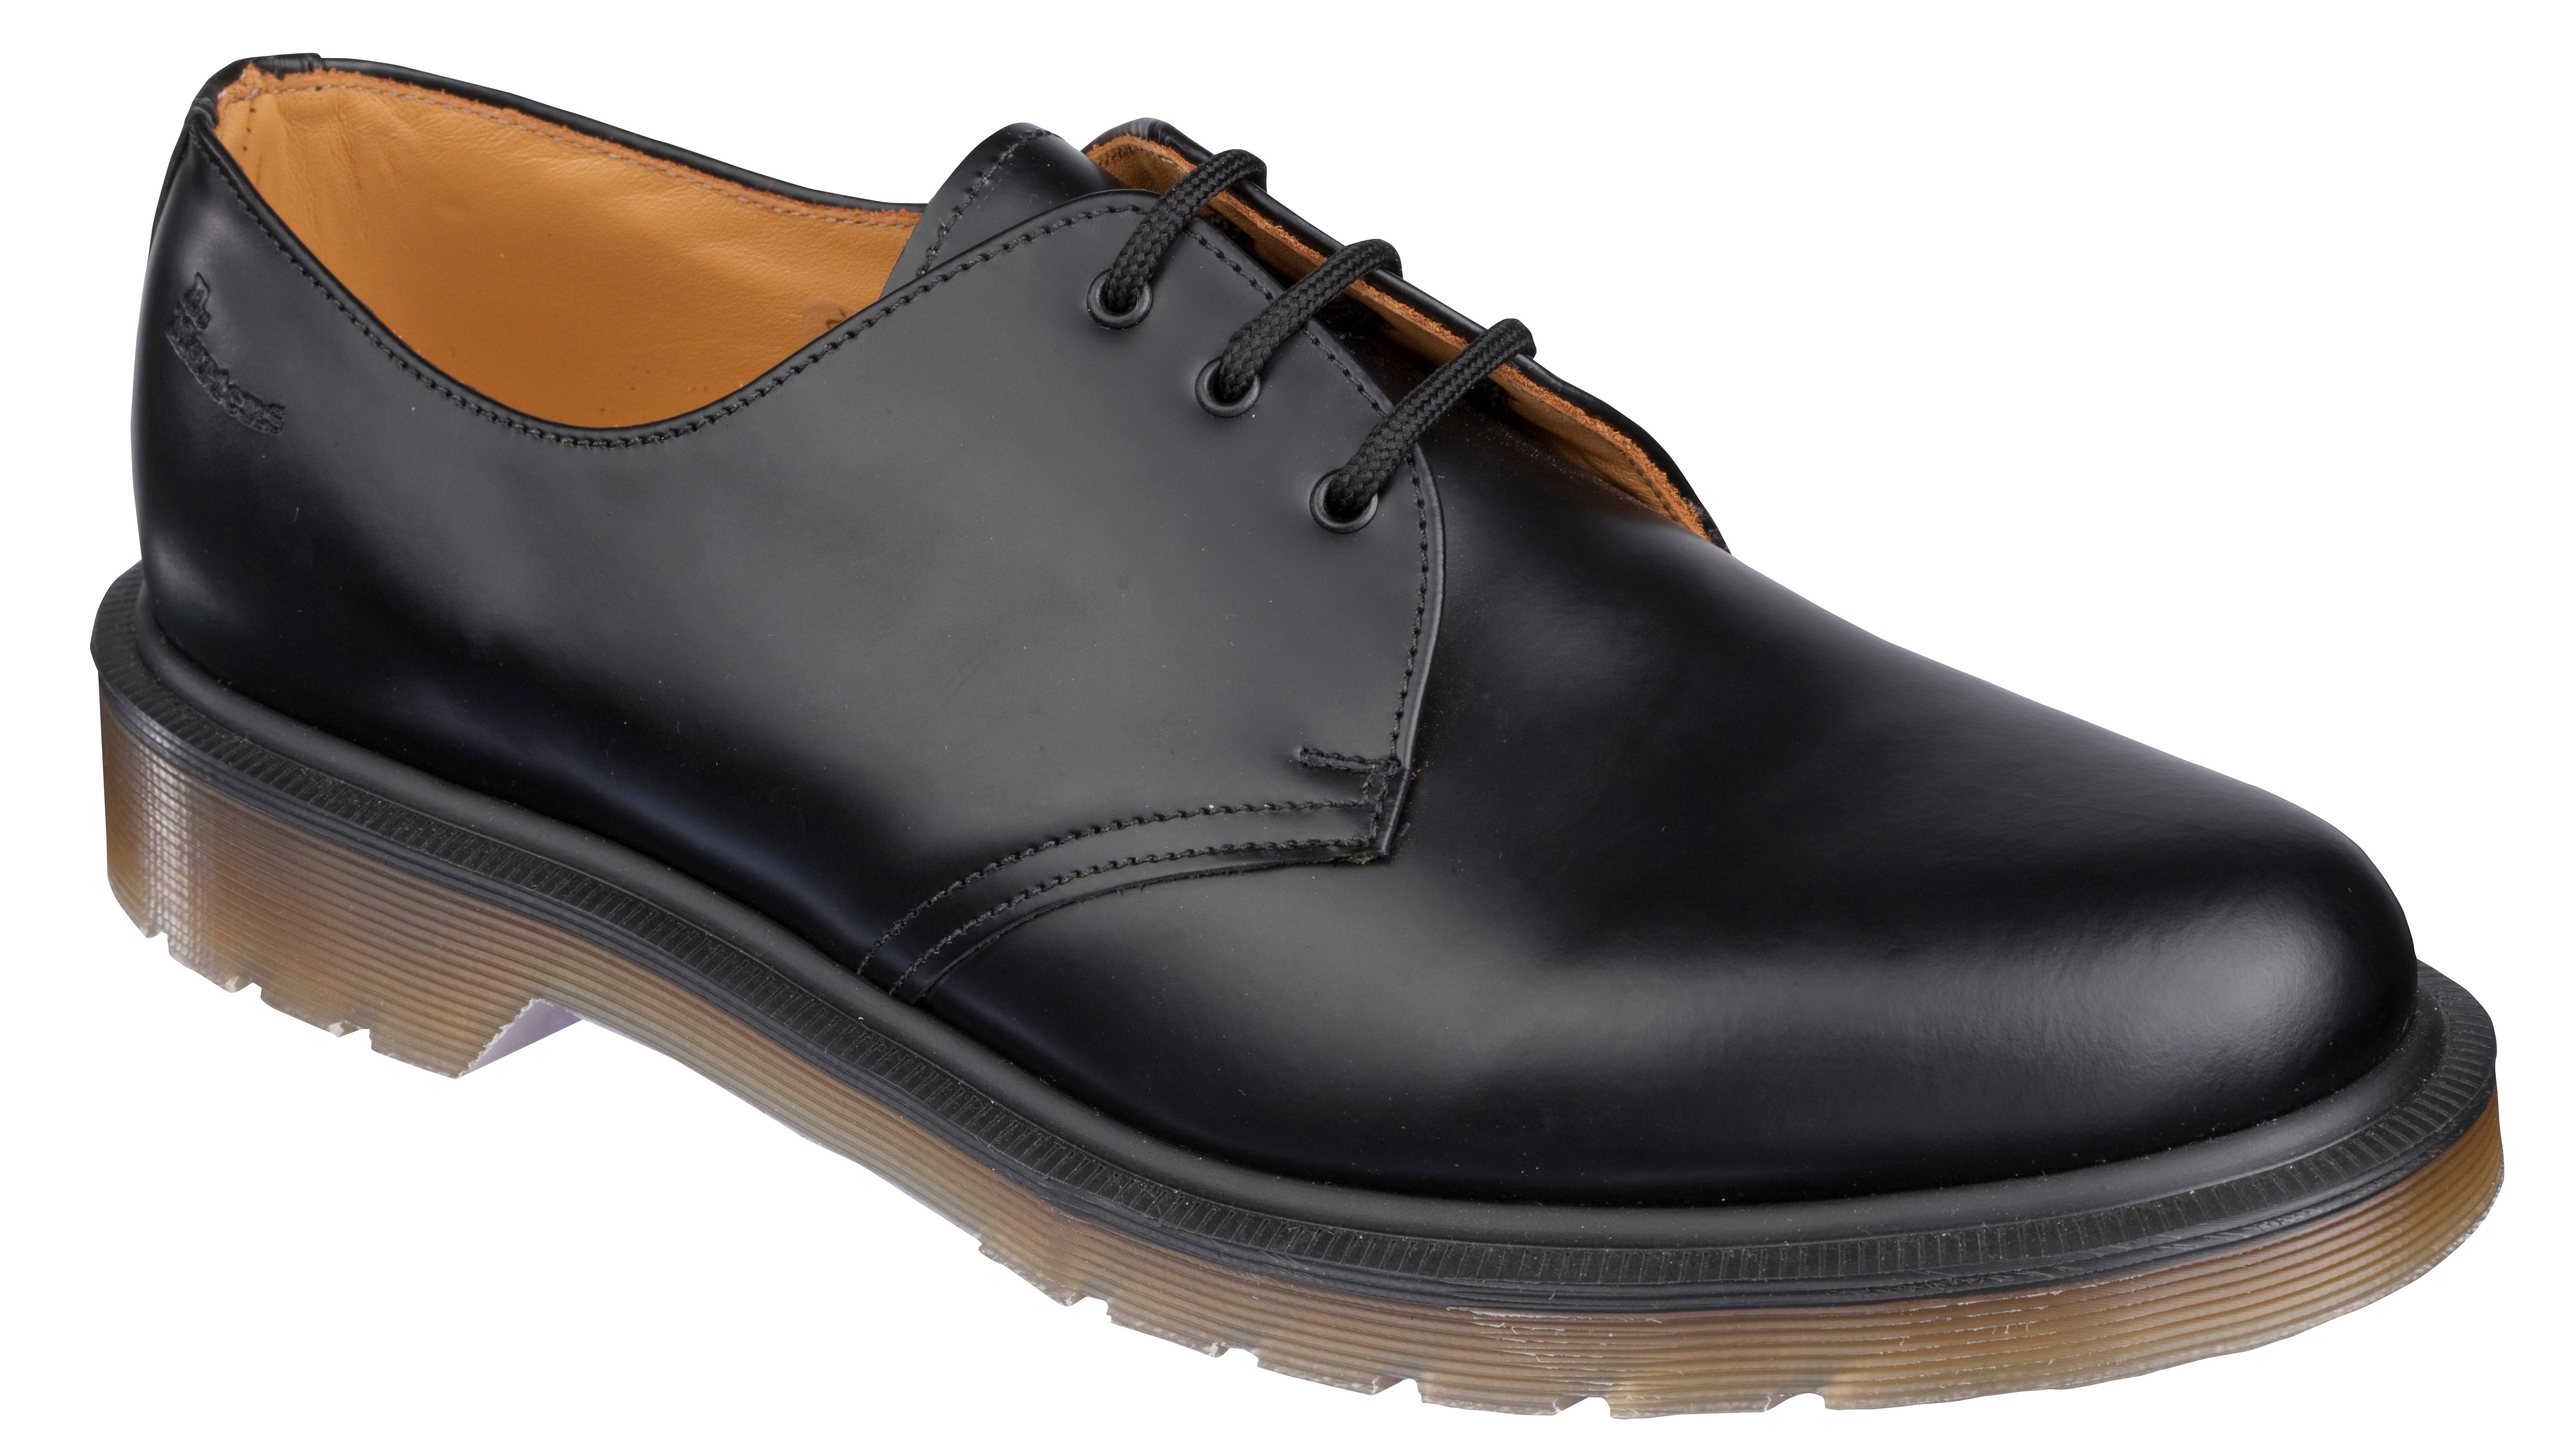 MIE 1461 BLACK SMOOTH OXFORD NO STITCH – Posers Hollywood